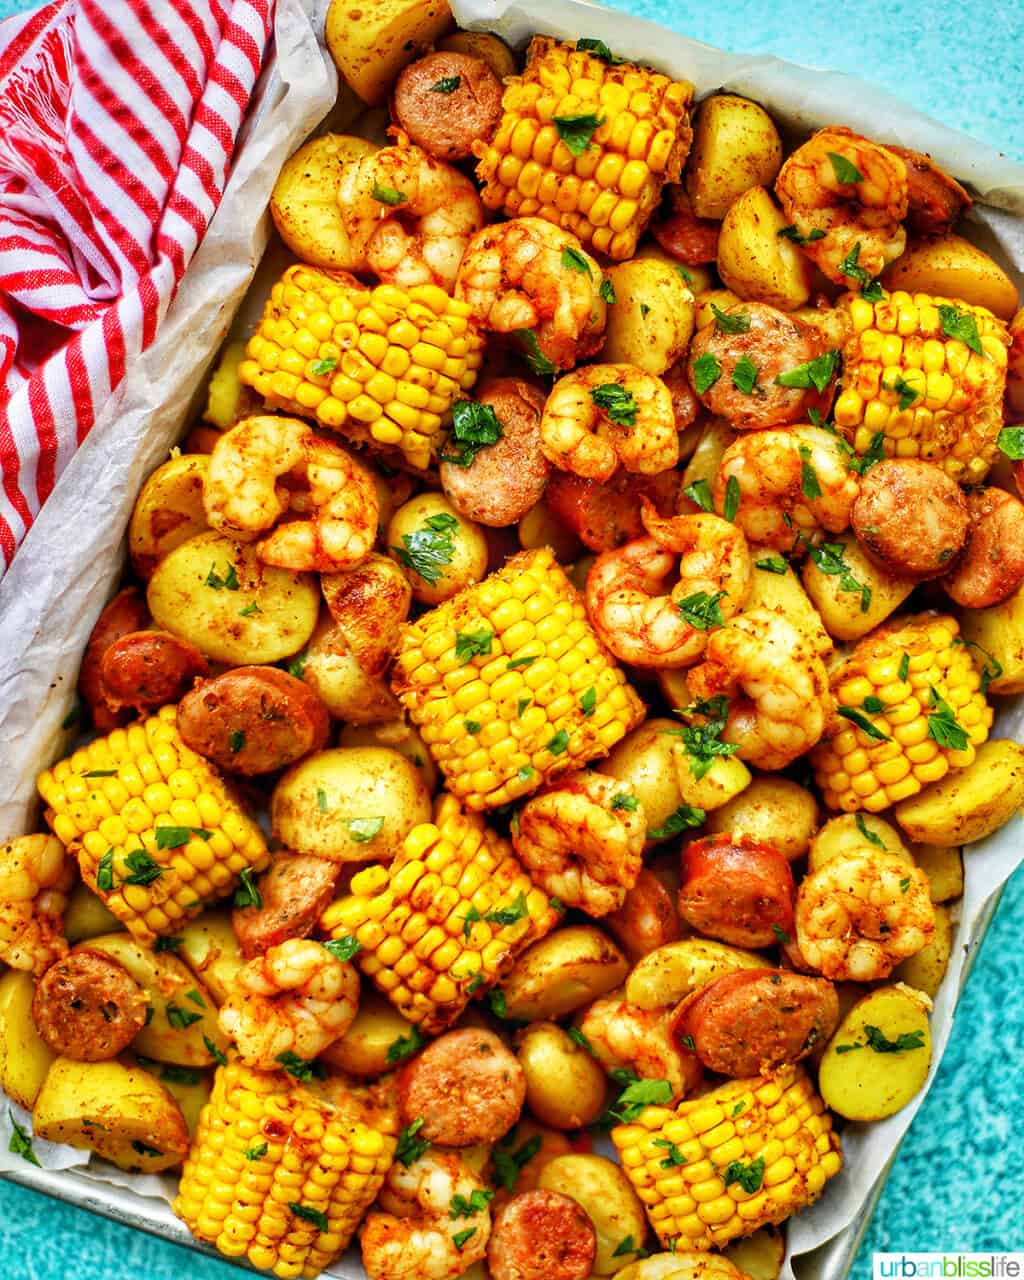 Low country boil with corn, sausage, potatoes, and shrimp on a sheet pan.